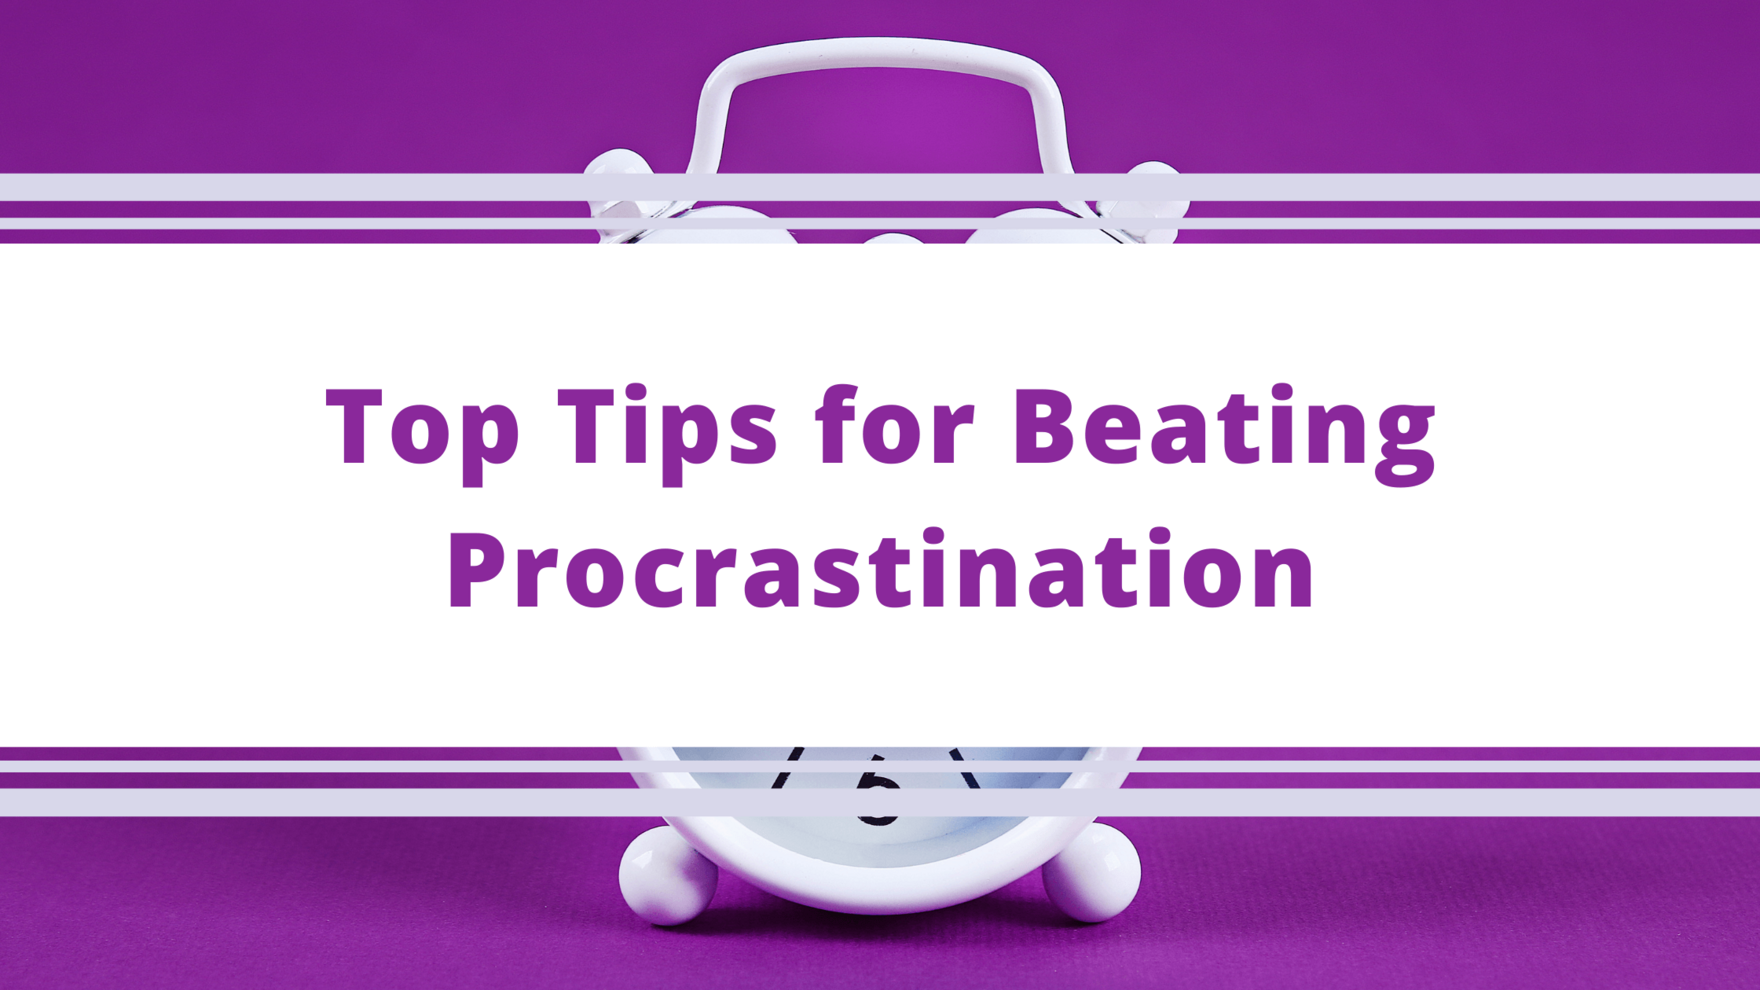 Top Tips Blog - Top Tips for Beating Procrastination